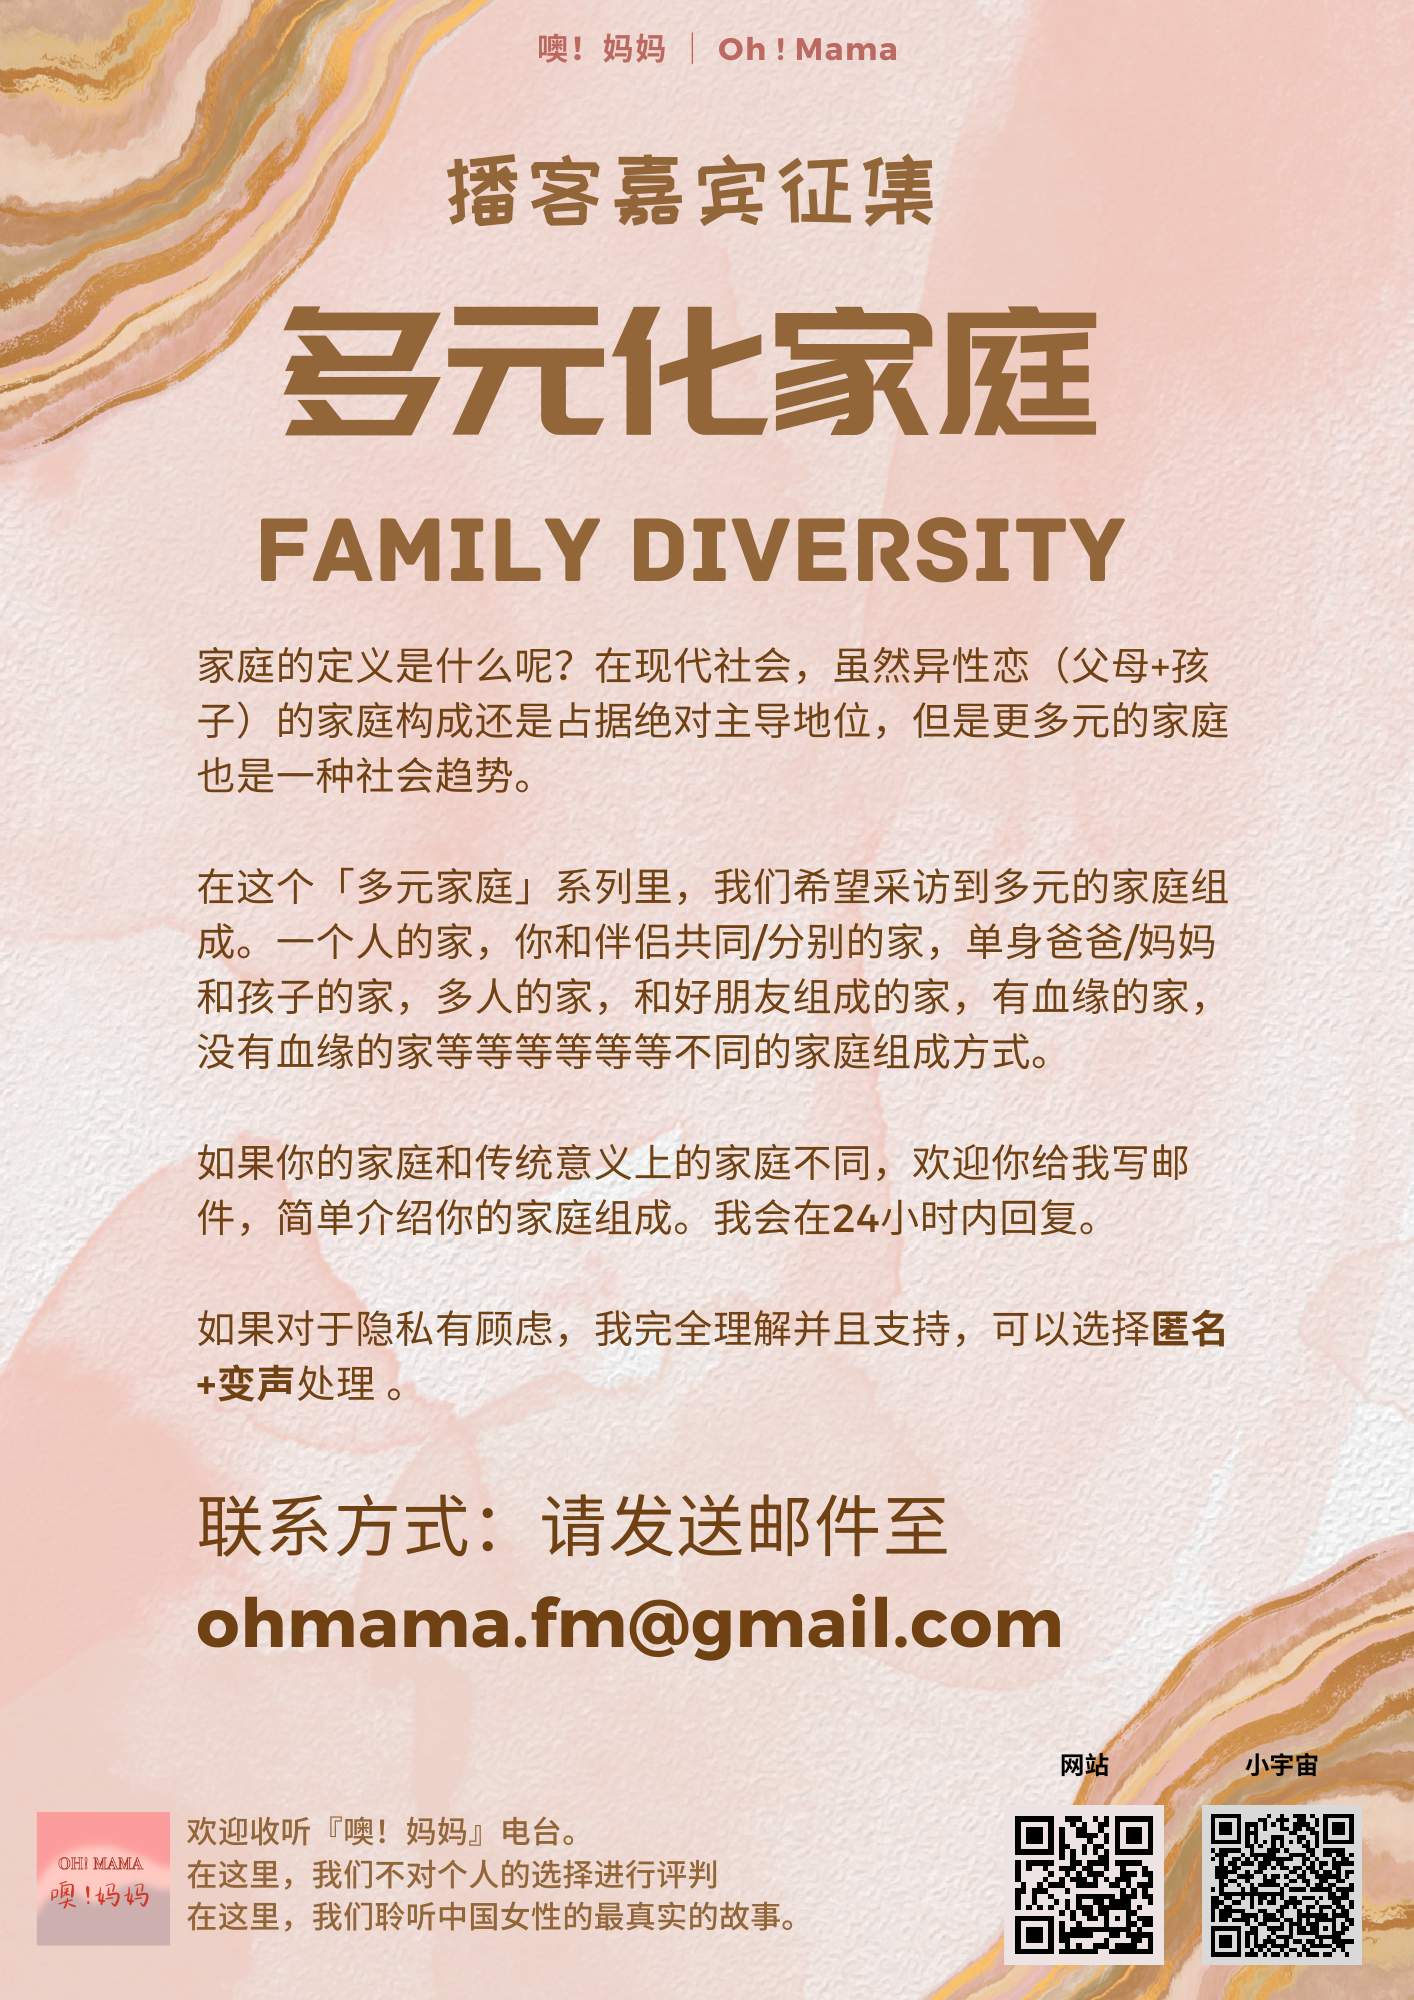 family diveristy poster.png